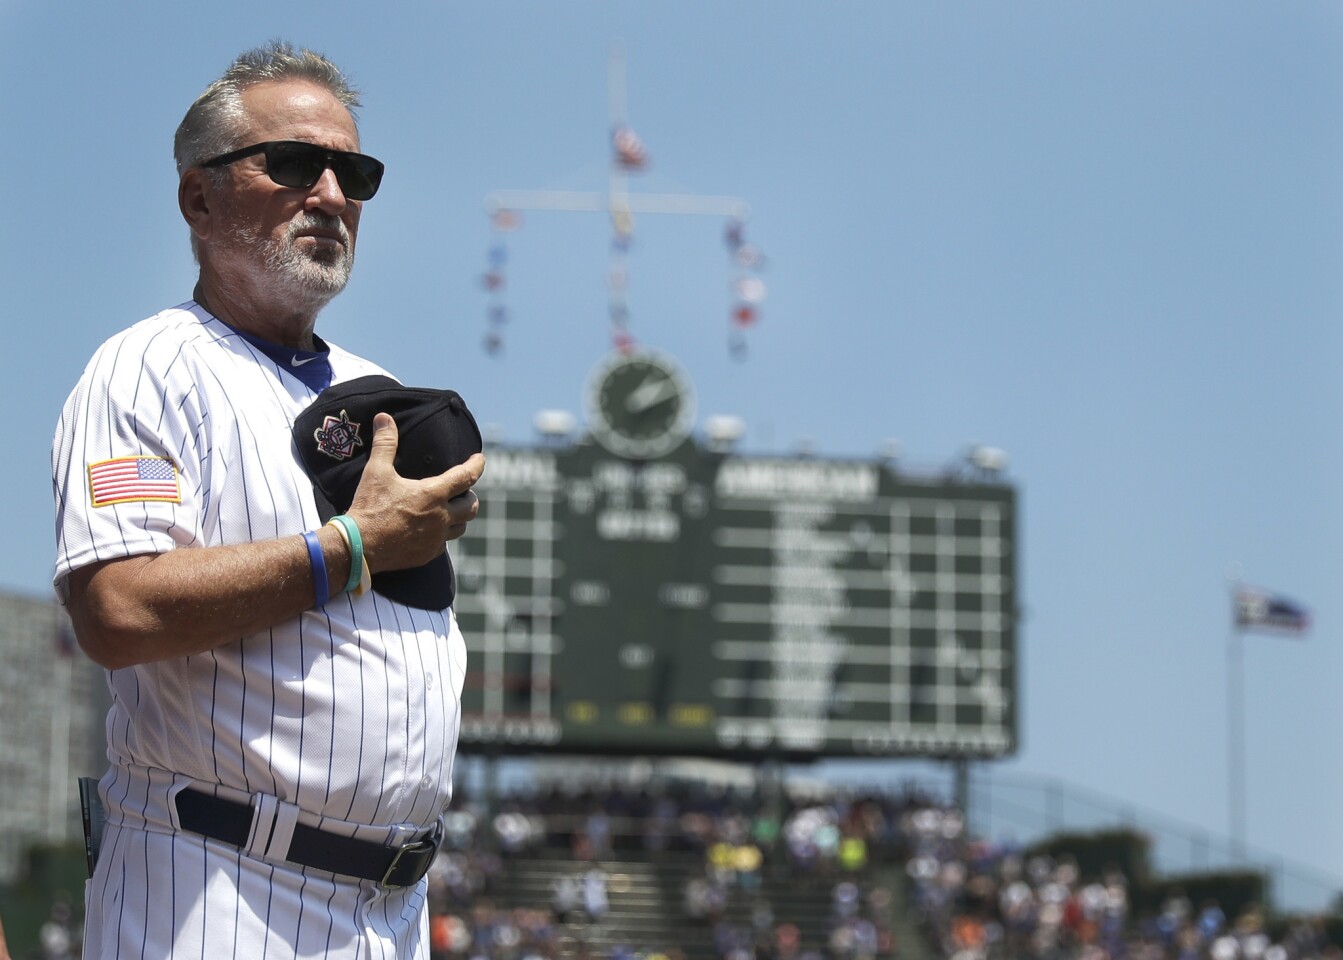 Chicago Cubs manager Joe Maddon stands for the national anthem before a baseball game against the Detroit Tigers Tuesday, July 3, 2018, in Chicago. (AP Photo/Charles Rex Arbogast)